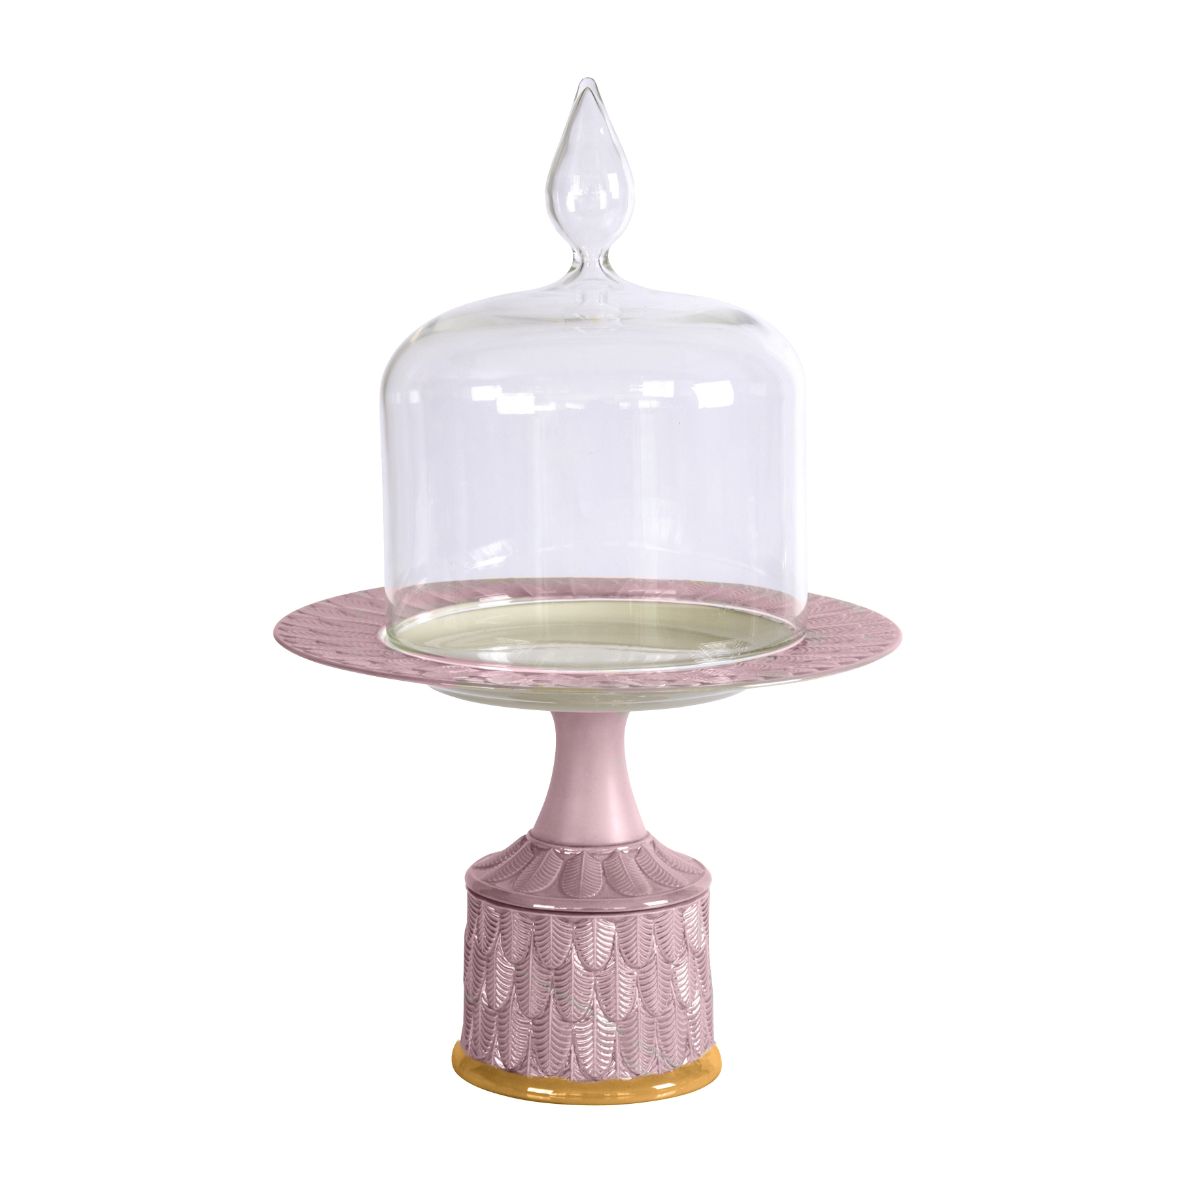 Peacock Lilac & Gold Medium Cake Stand With Cloche